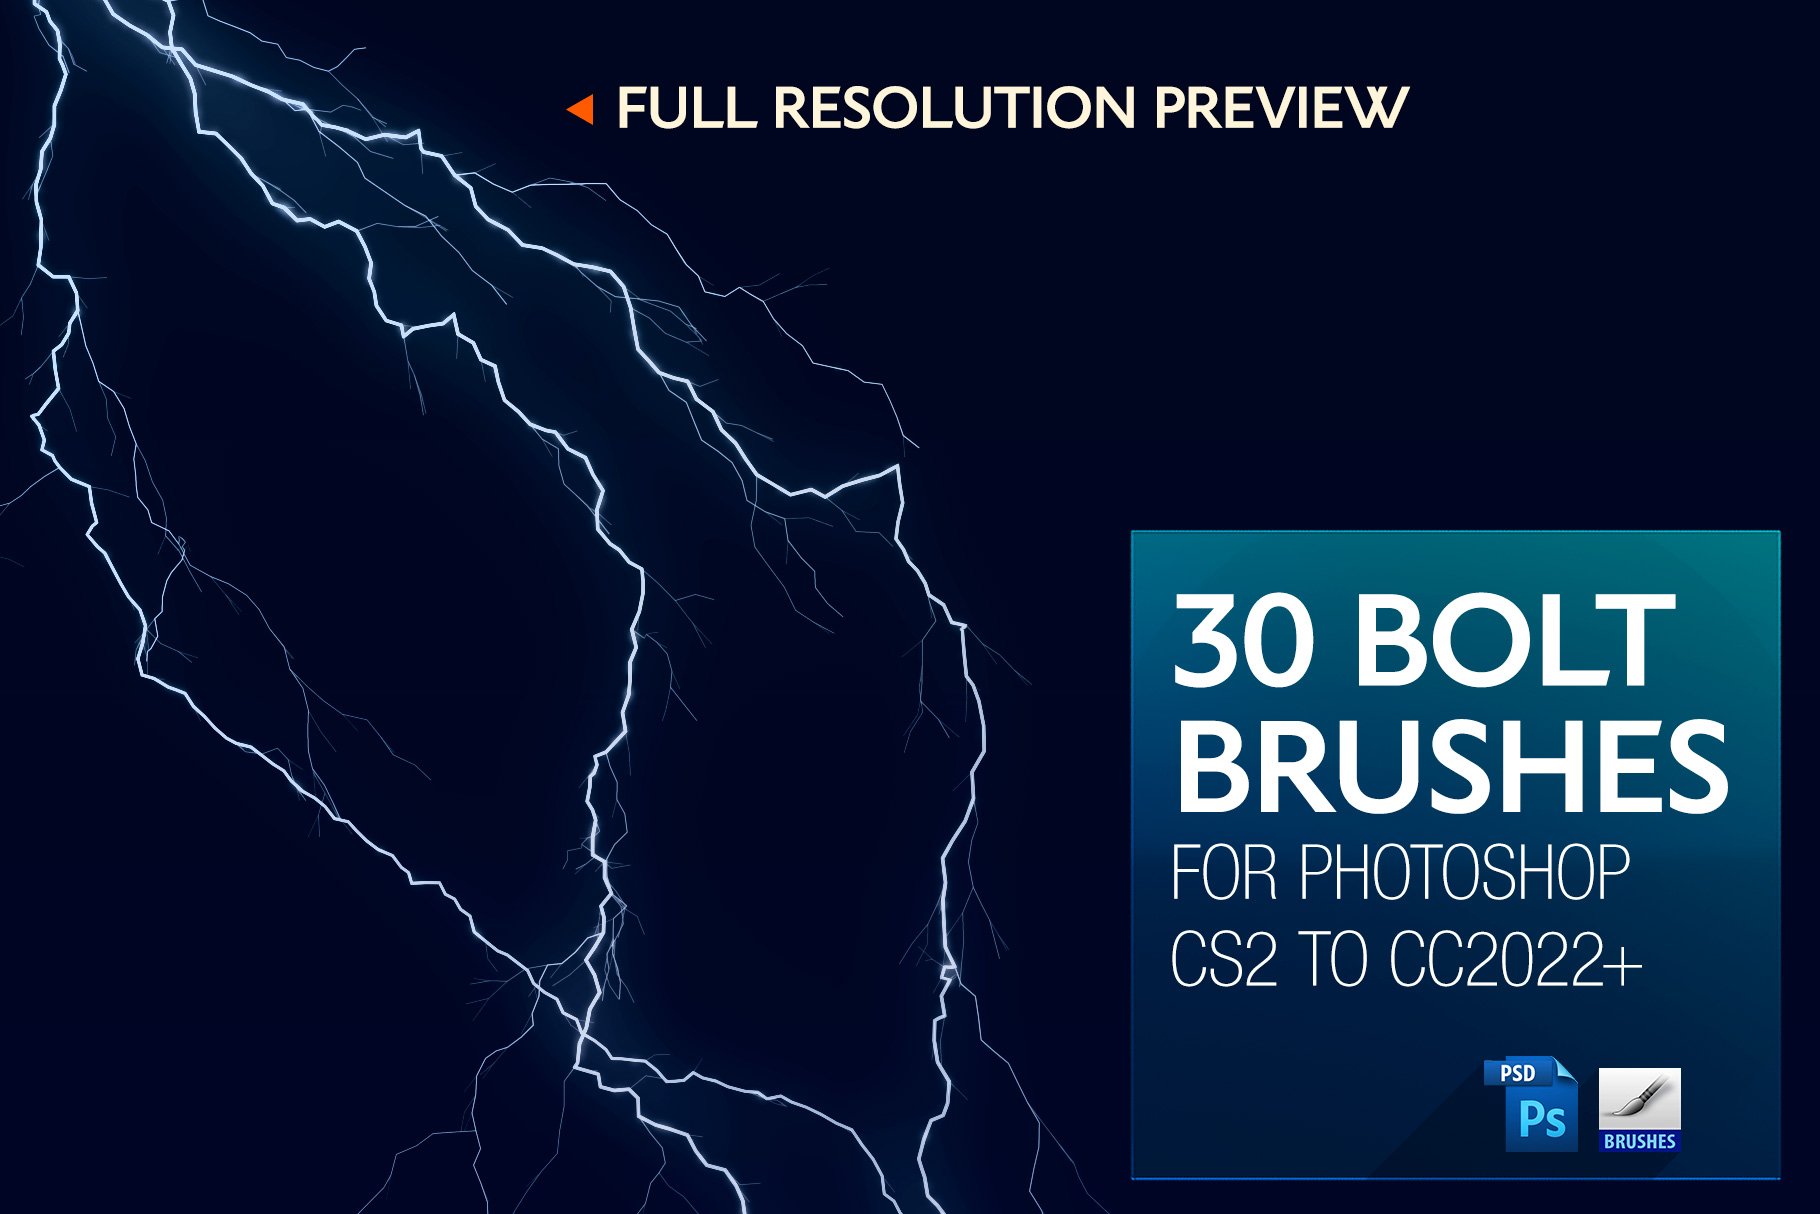 30 Bolt Brushes for PS CS2 to CC202+preview image.